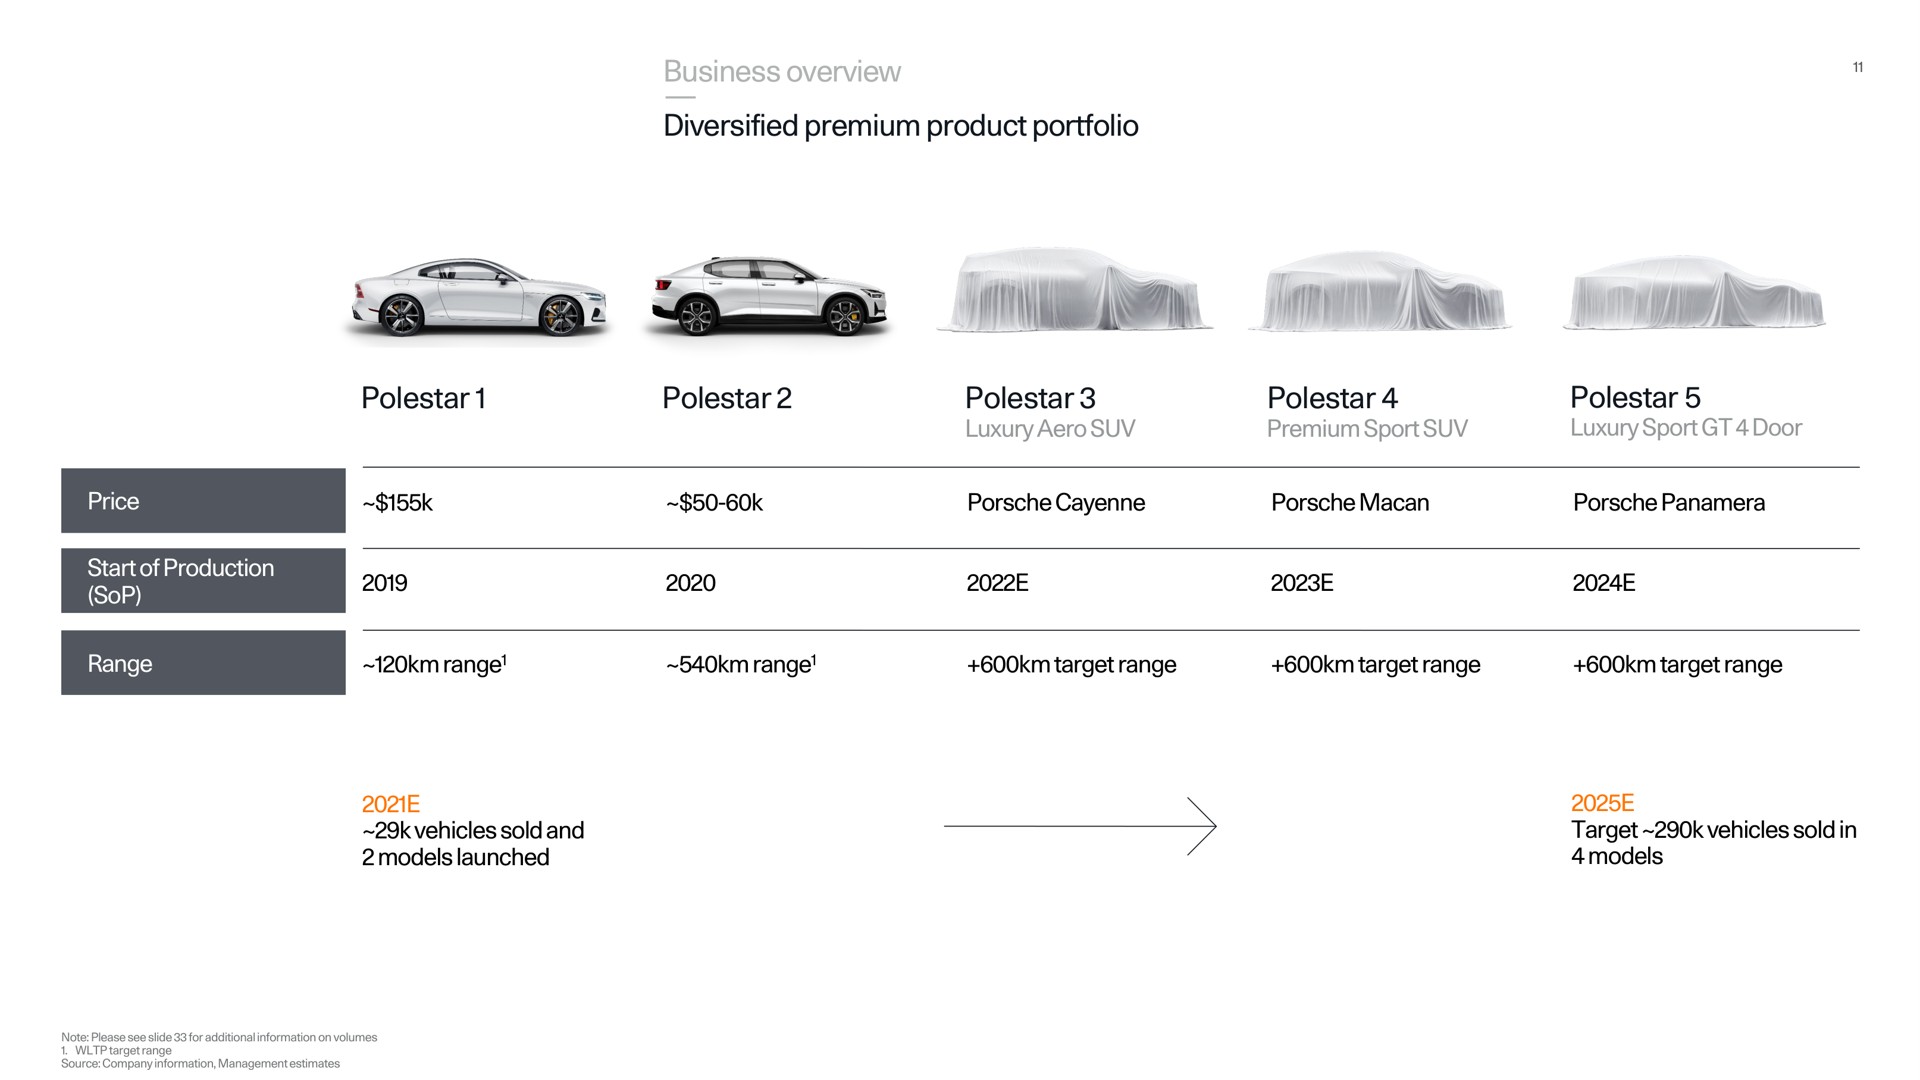 business overview diversified premium product portfolio polestar polestar polestar polestar polestar | Polestar